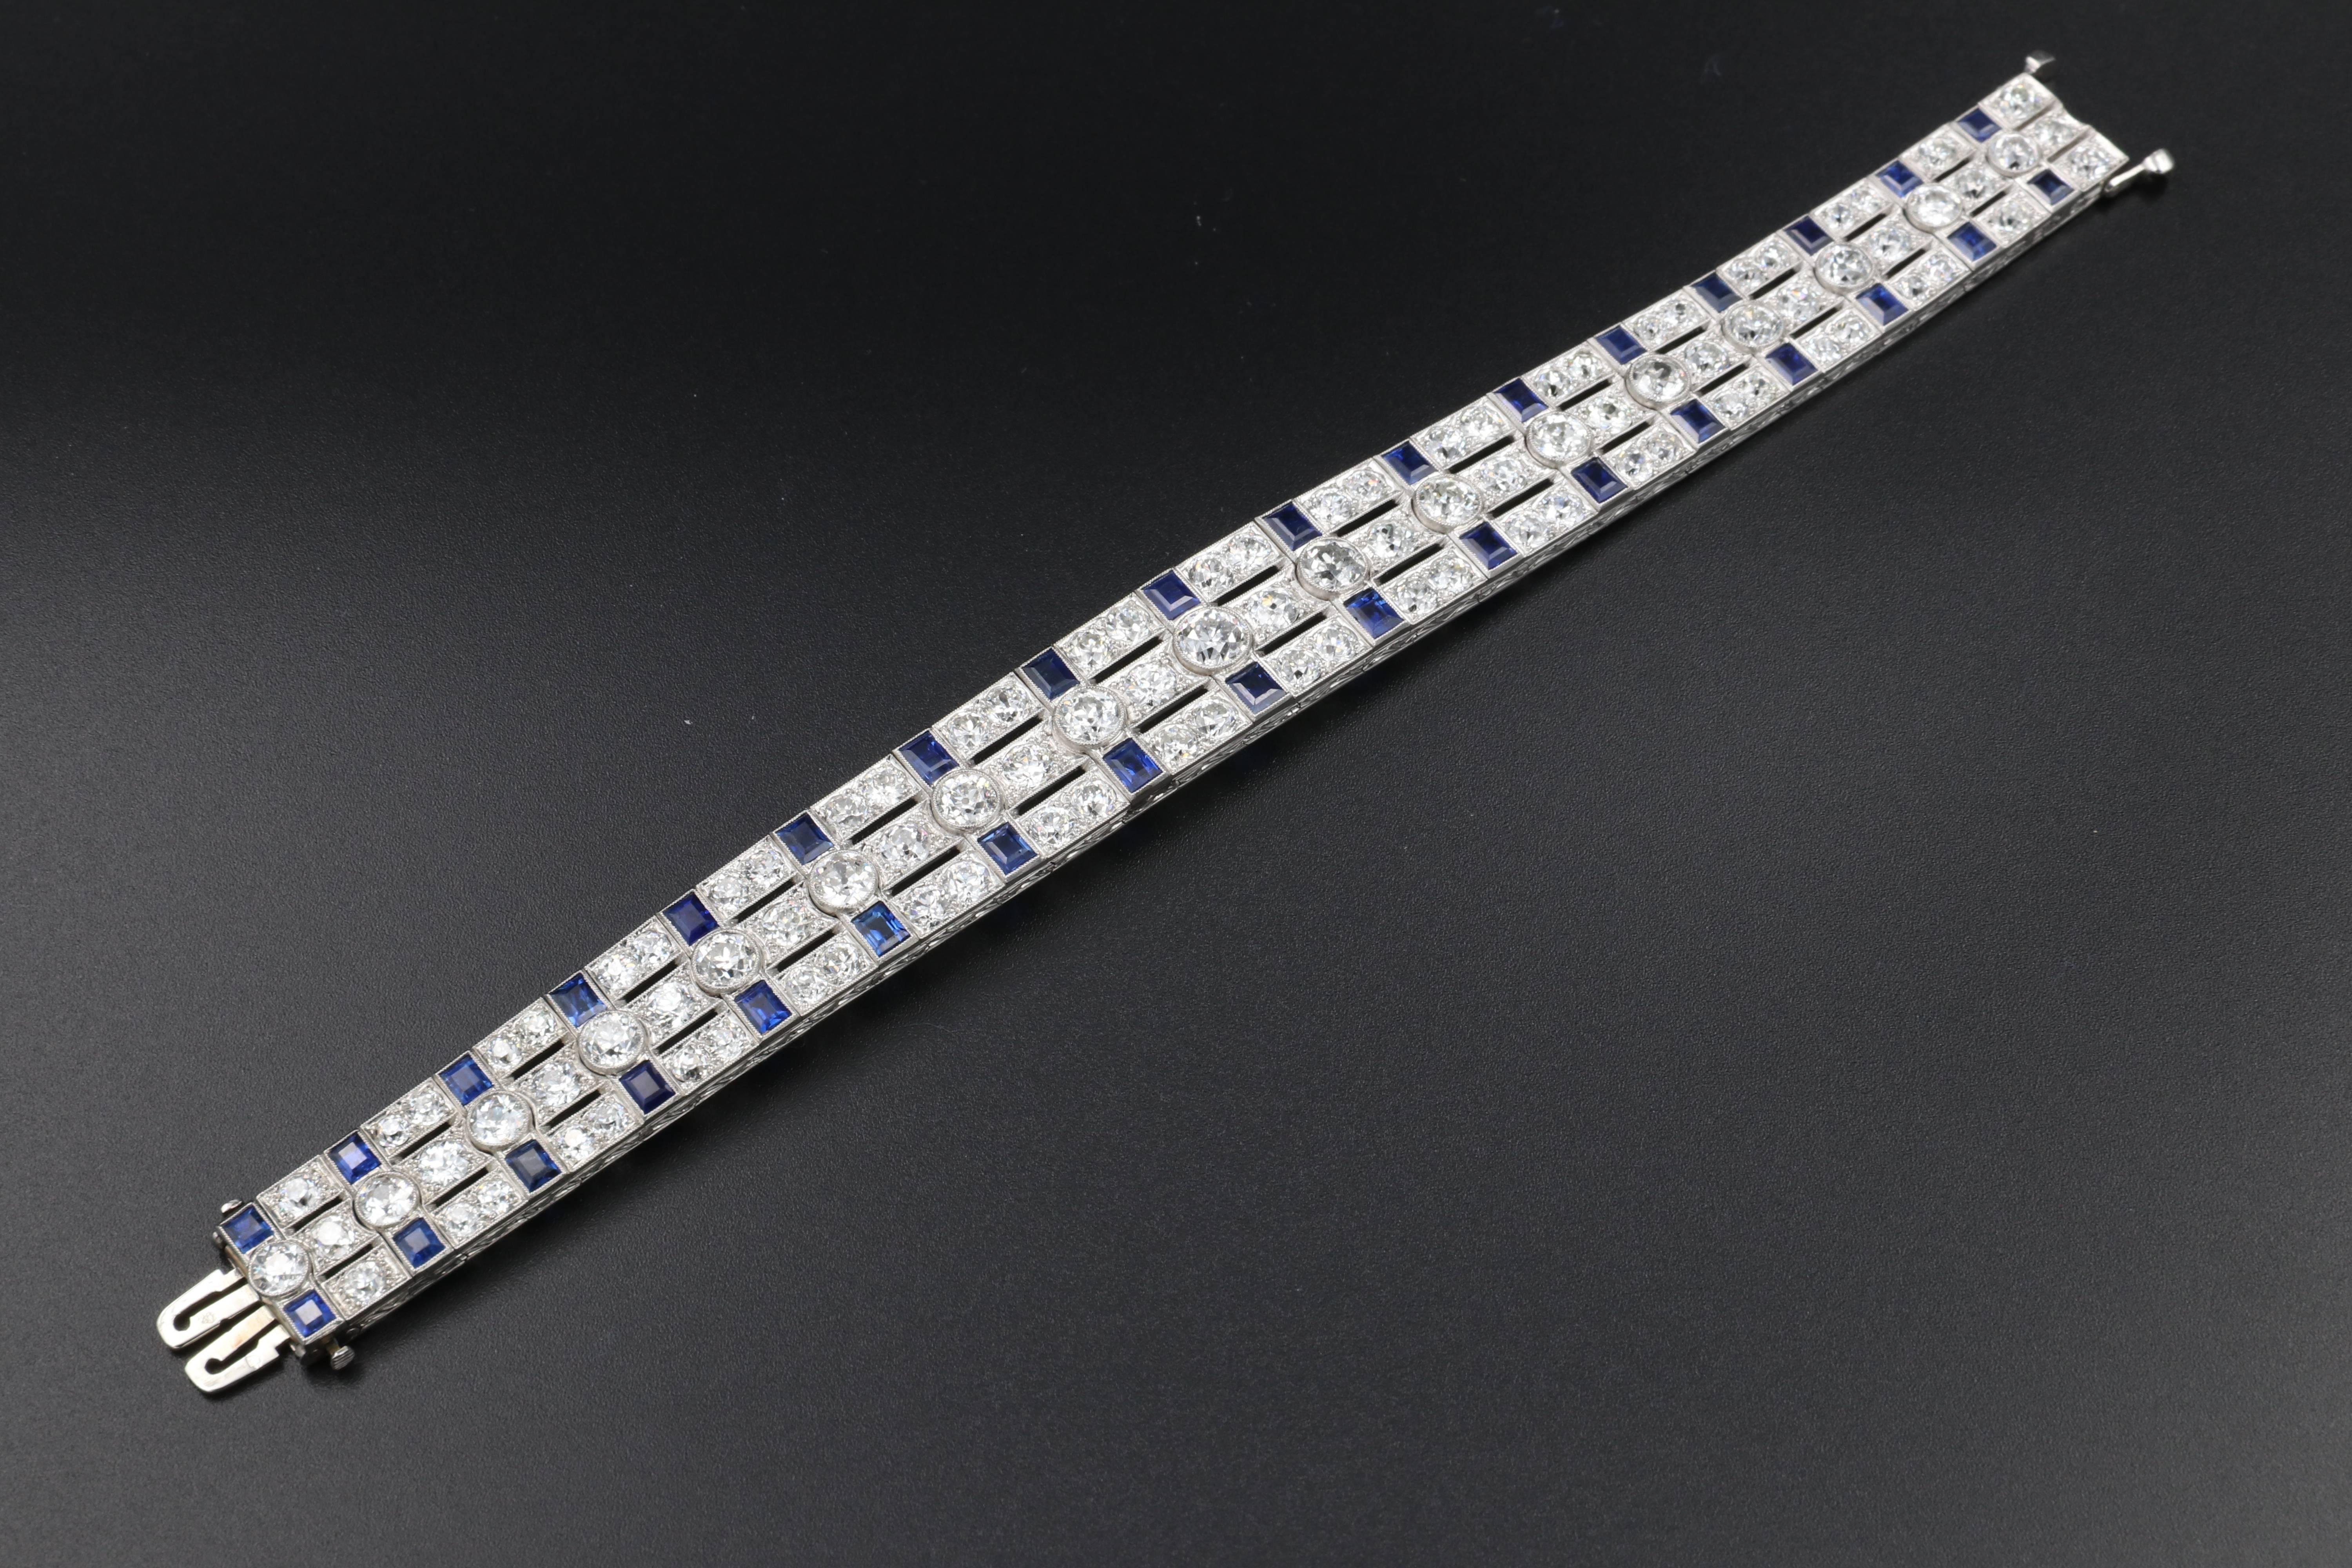 Exquisite French Art deco bracelet, circa 1925. Made of platinum, beautiful old French cut diamonds and natural sapphires. 
The bracelet has its original marks for the maker(SB) and platinum (dog).
The bracelet is in very good condition.
The quality